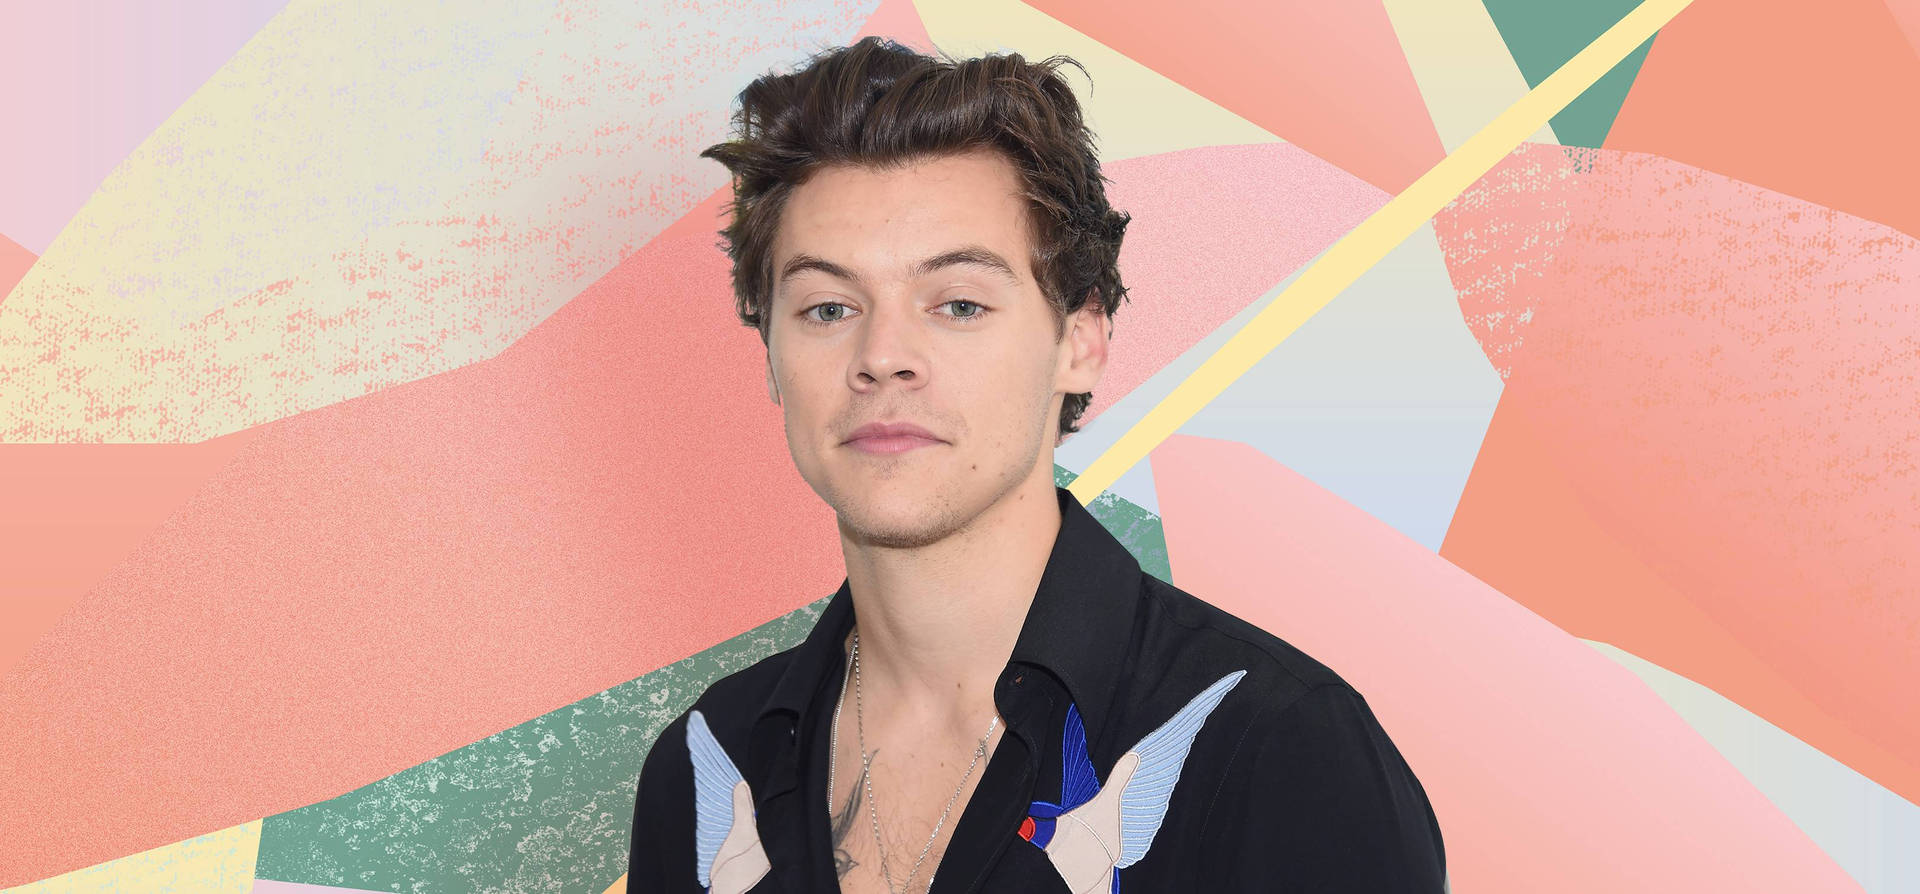 Free Harry Styles Wallpaper Downloads, [200+] Harry Styles Wallpapers for  FREE 